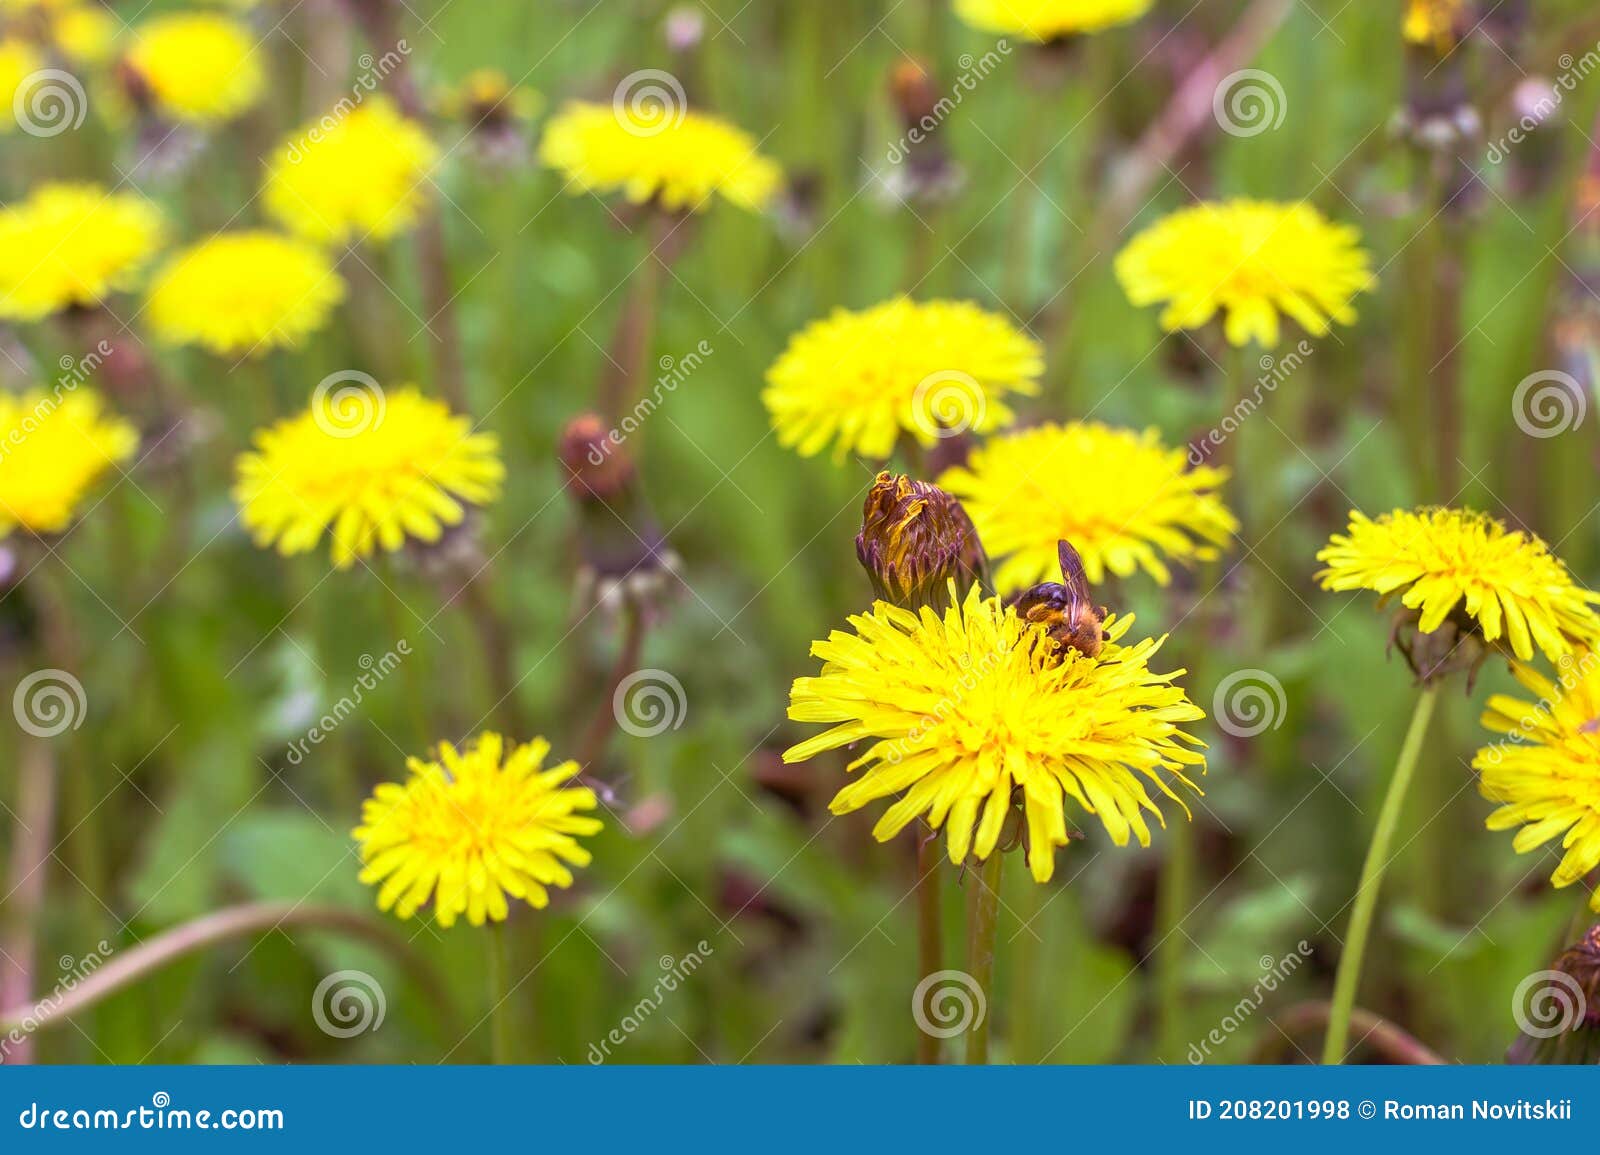 green-meadow-close-up-in-the-bloom-of-yellow-dandelions-with-a-bee-swarming-in-the-flower